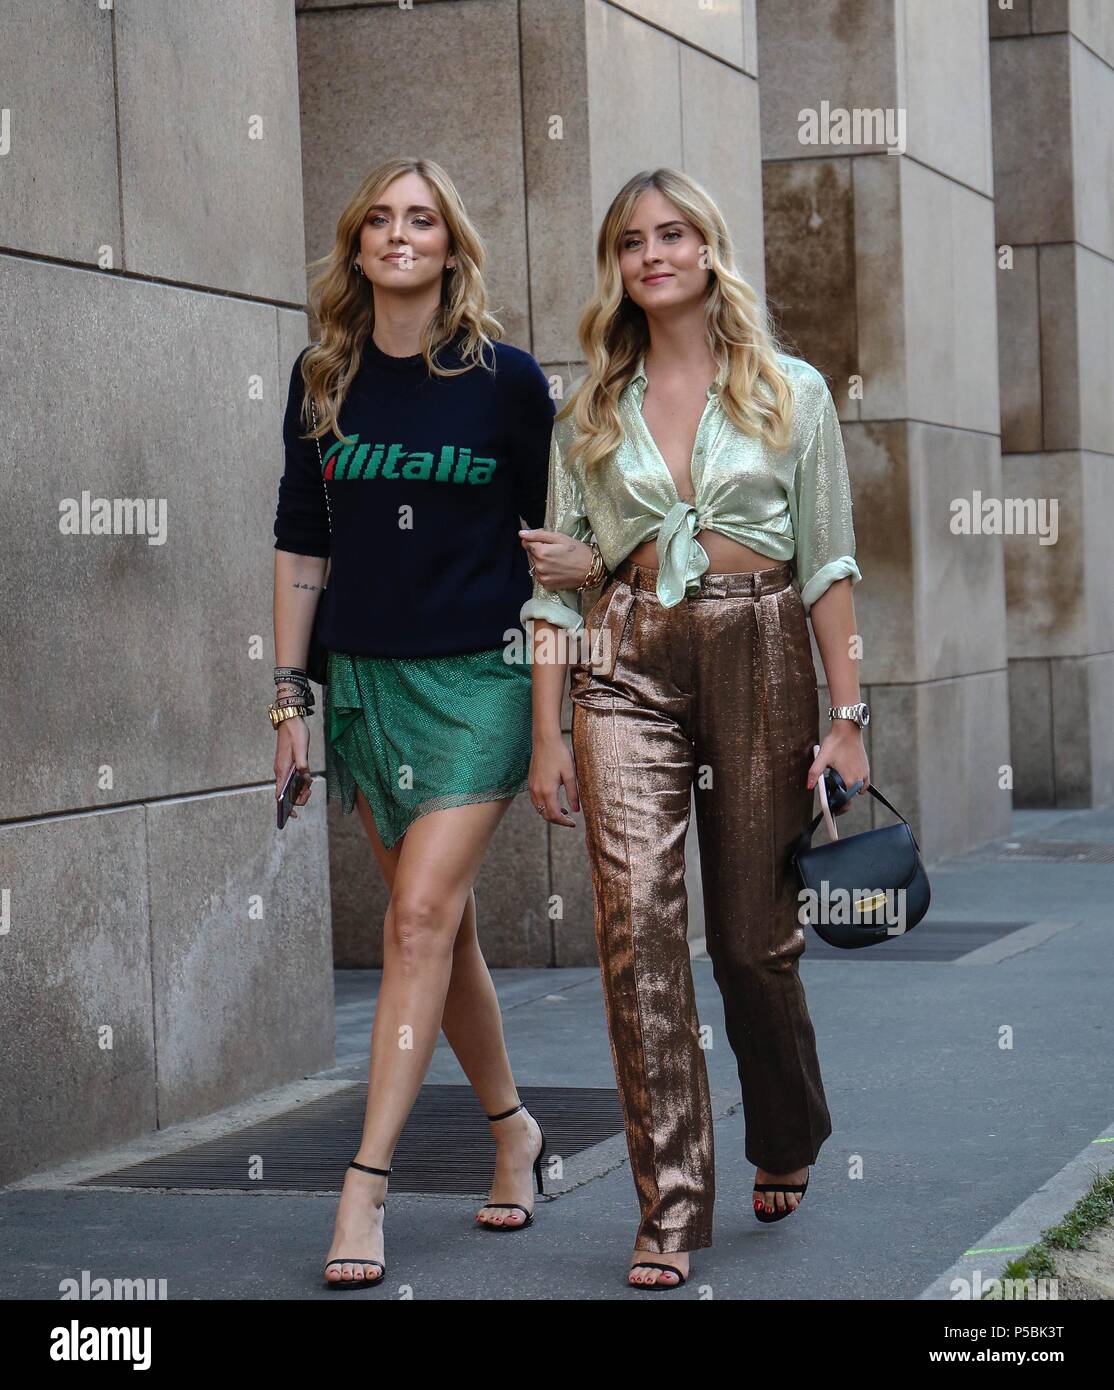 Milan, Italy. 15th June, 2018. MILAN- 15 June 2018 Chiara Ferragni and Valentina  Ferragni on the street during the Milan Fashion Week Credit: Mauro Del  Signore/Pacific Press/Alamy Live News Stock Photo - Alamy